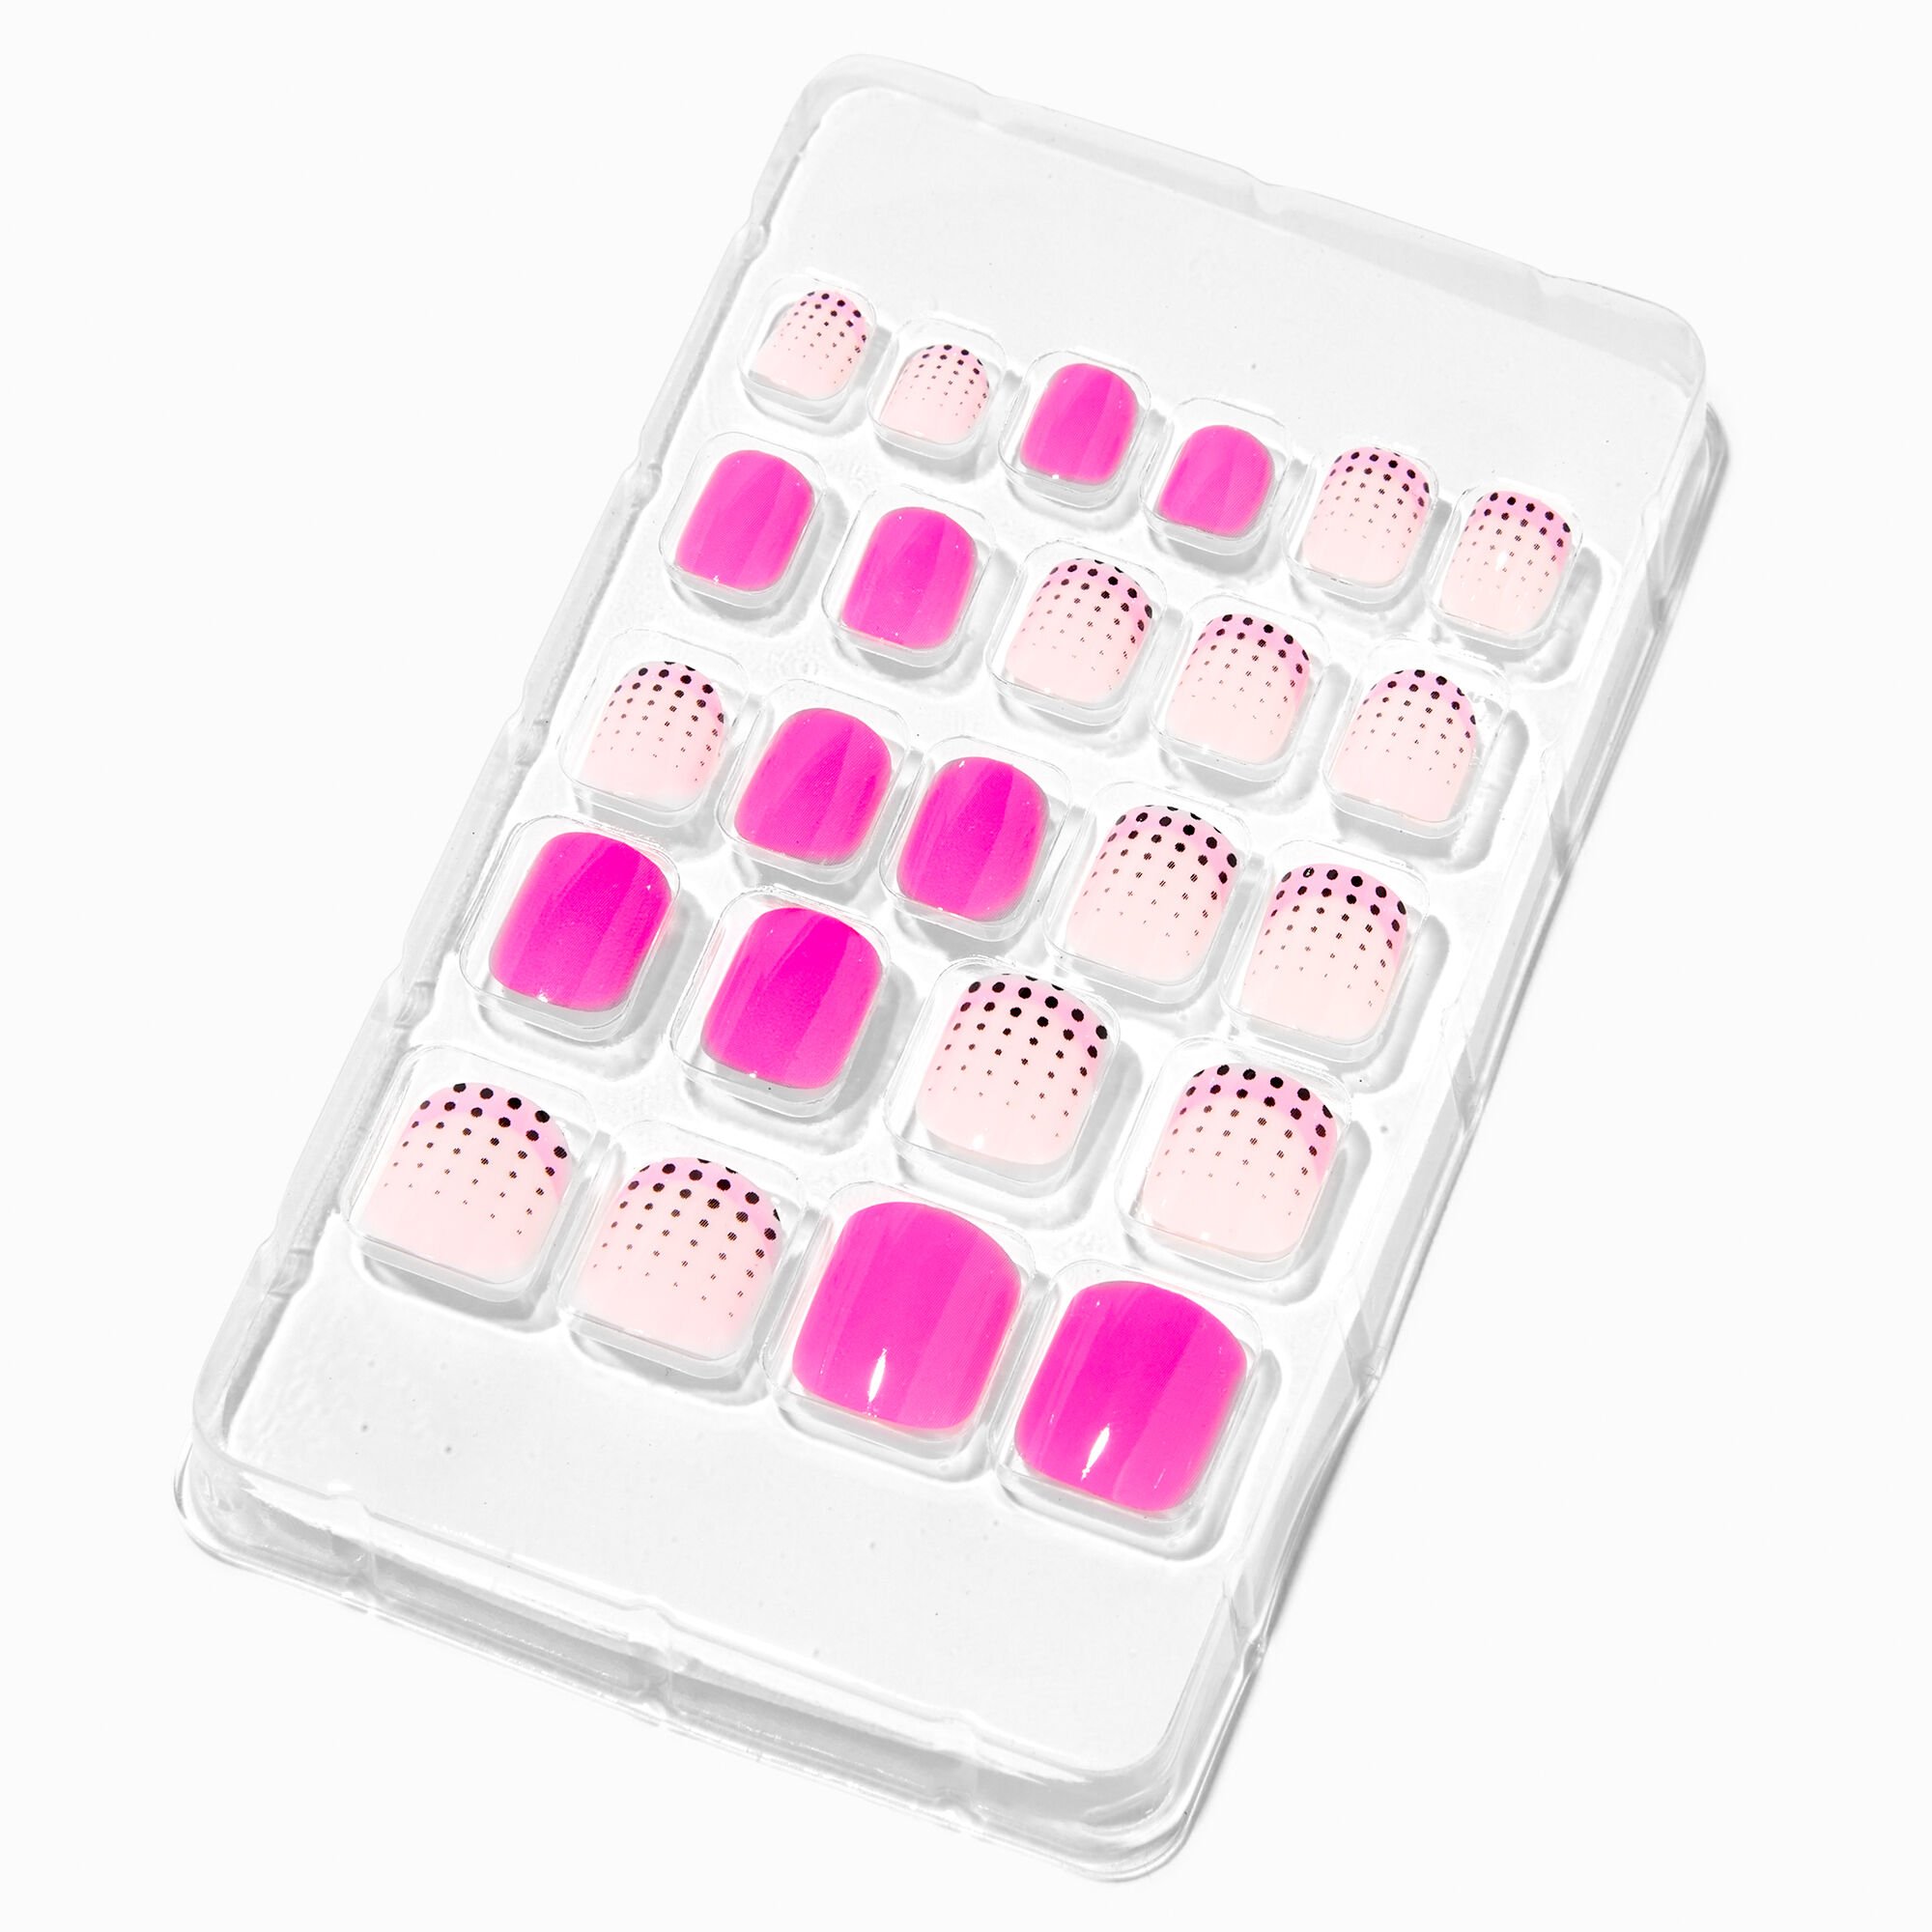 View Claires Polka Dot French Tip Square Press On Vegan Faux Nail Set 24 Pack Pink information